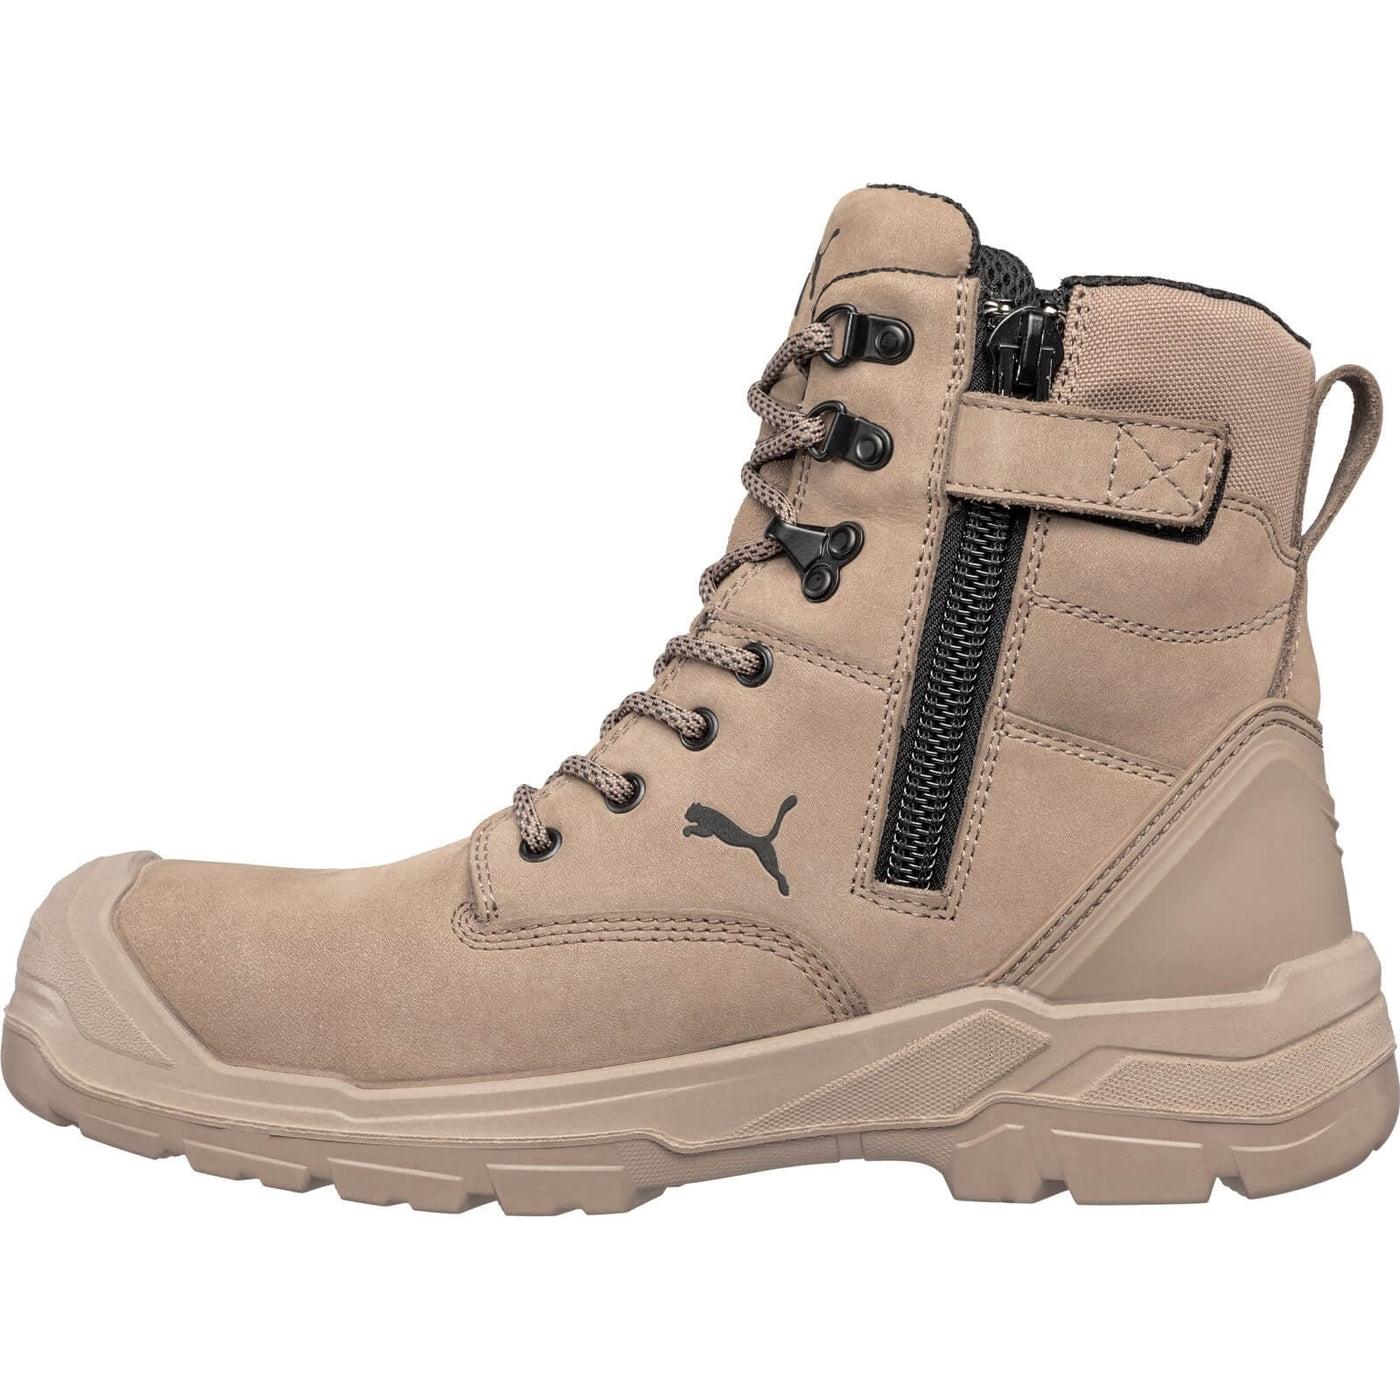 Puma Safety Conquest Safety Boots Stone 7#colour_stone